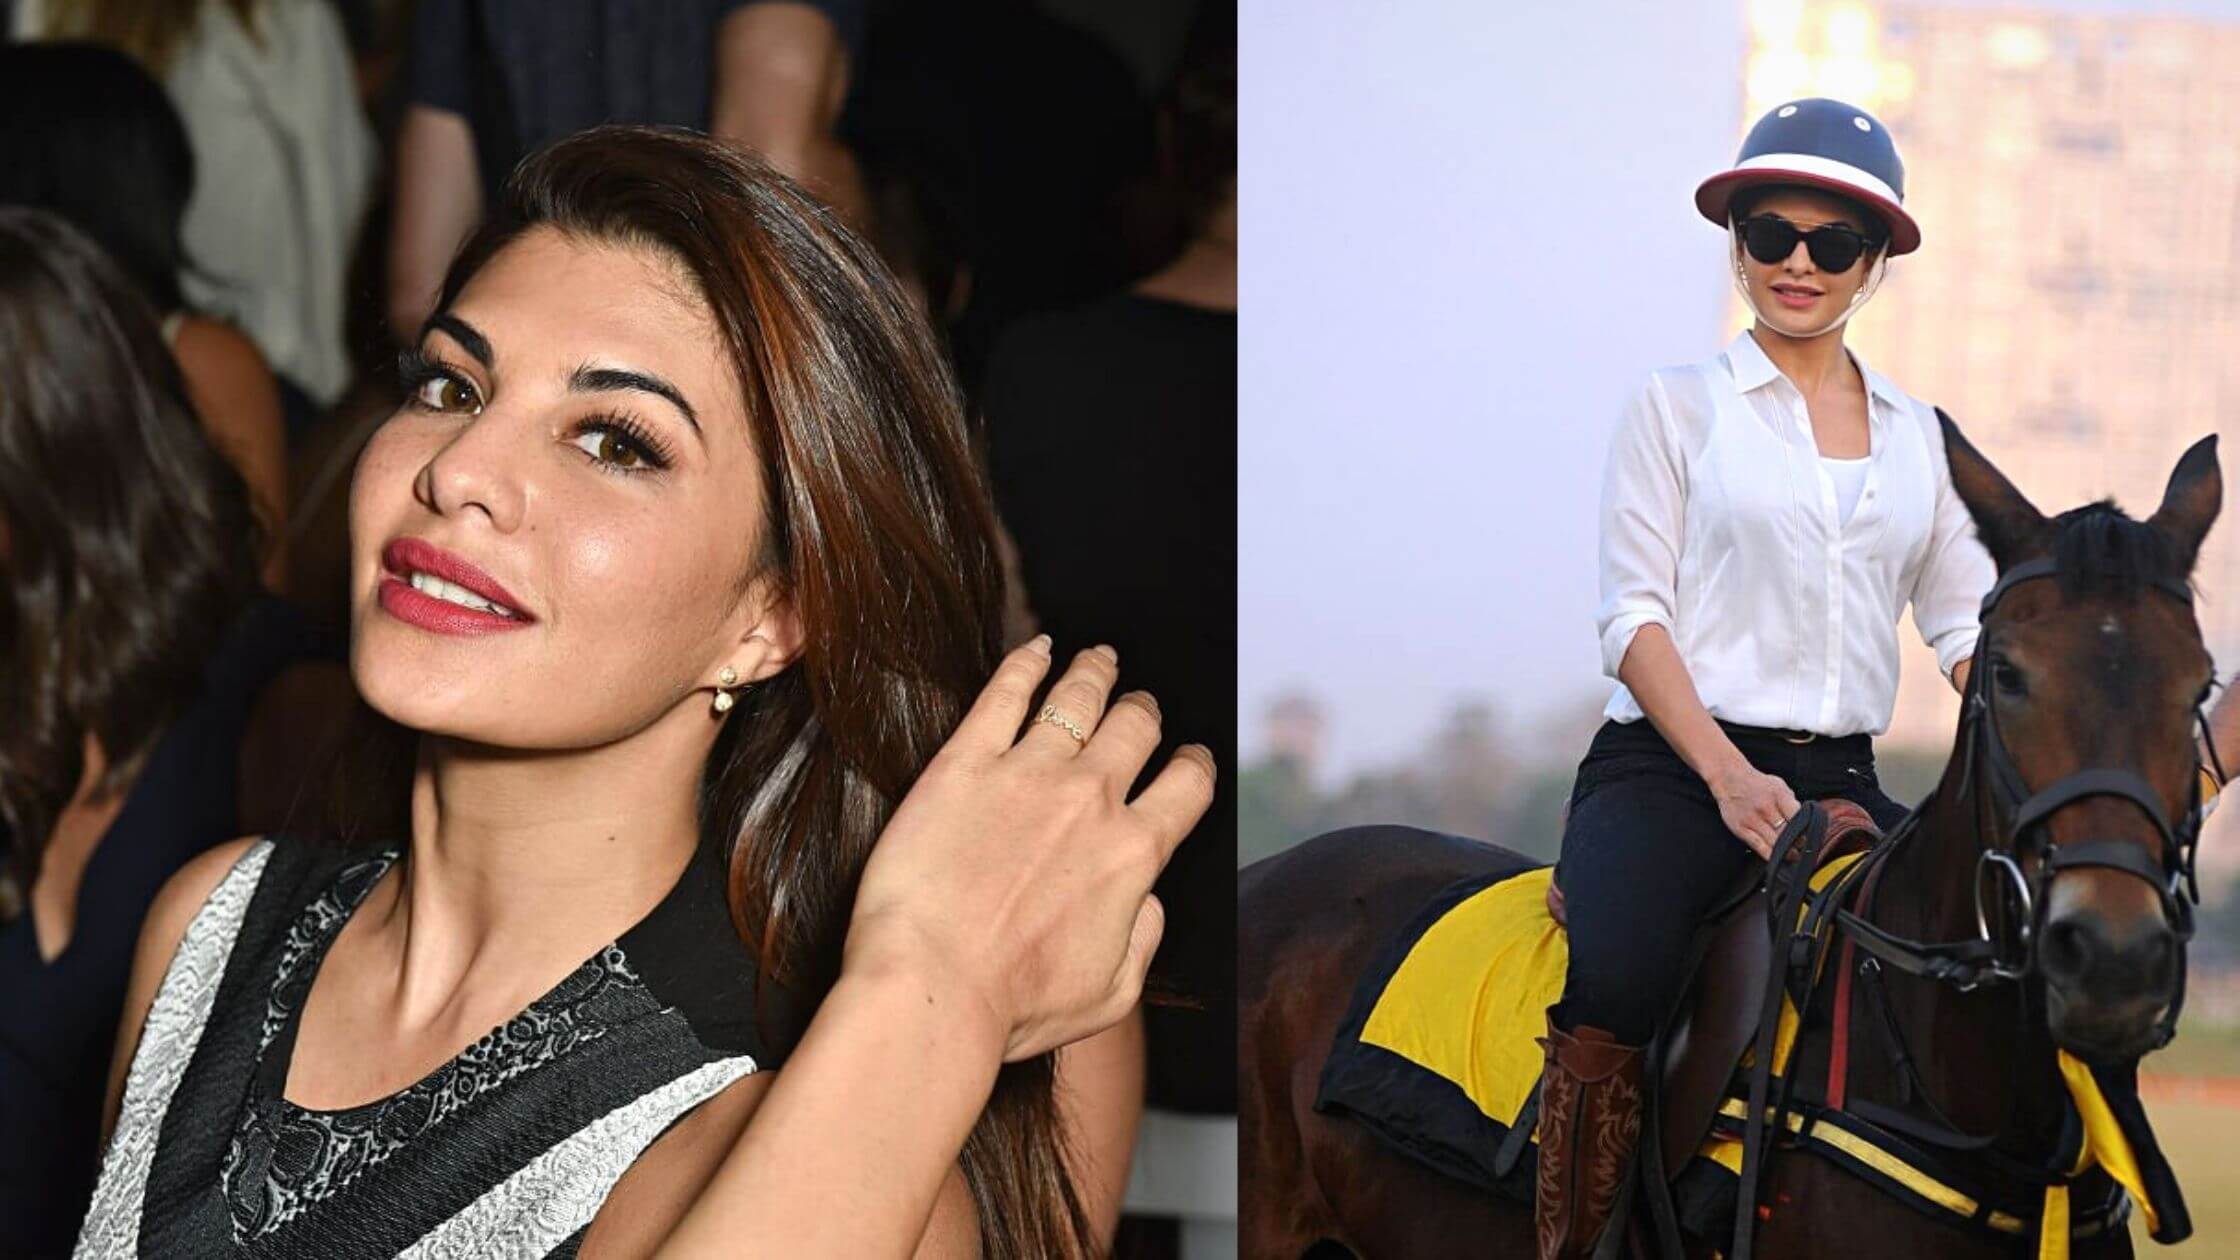 Jacqueline Fernandez Career, Bio, Marriage, Parents, Boyfriend, Age, Hollywood, Money Laundering Case, Height, News, Net Worth, And More